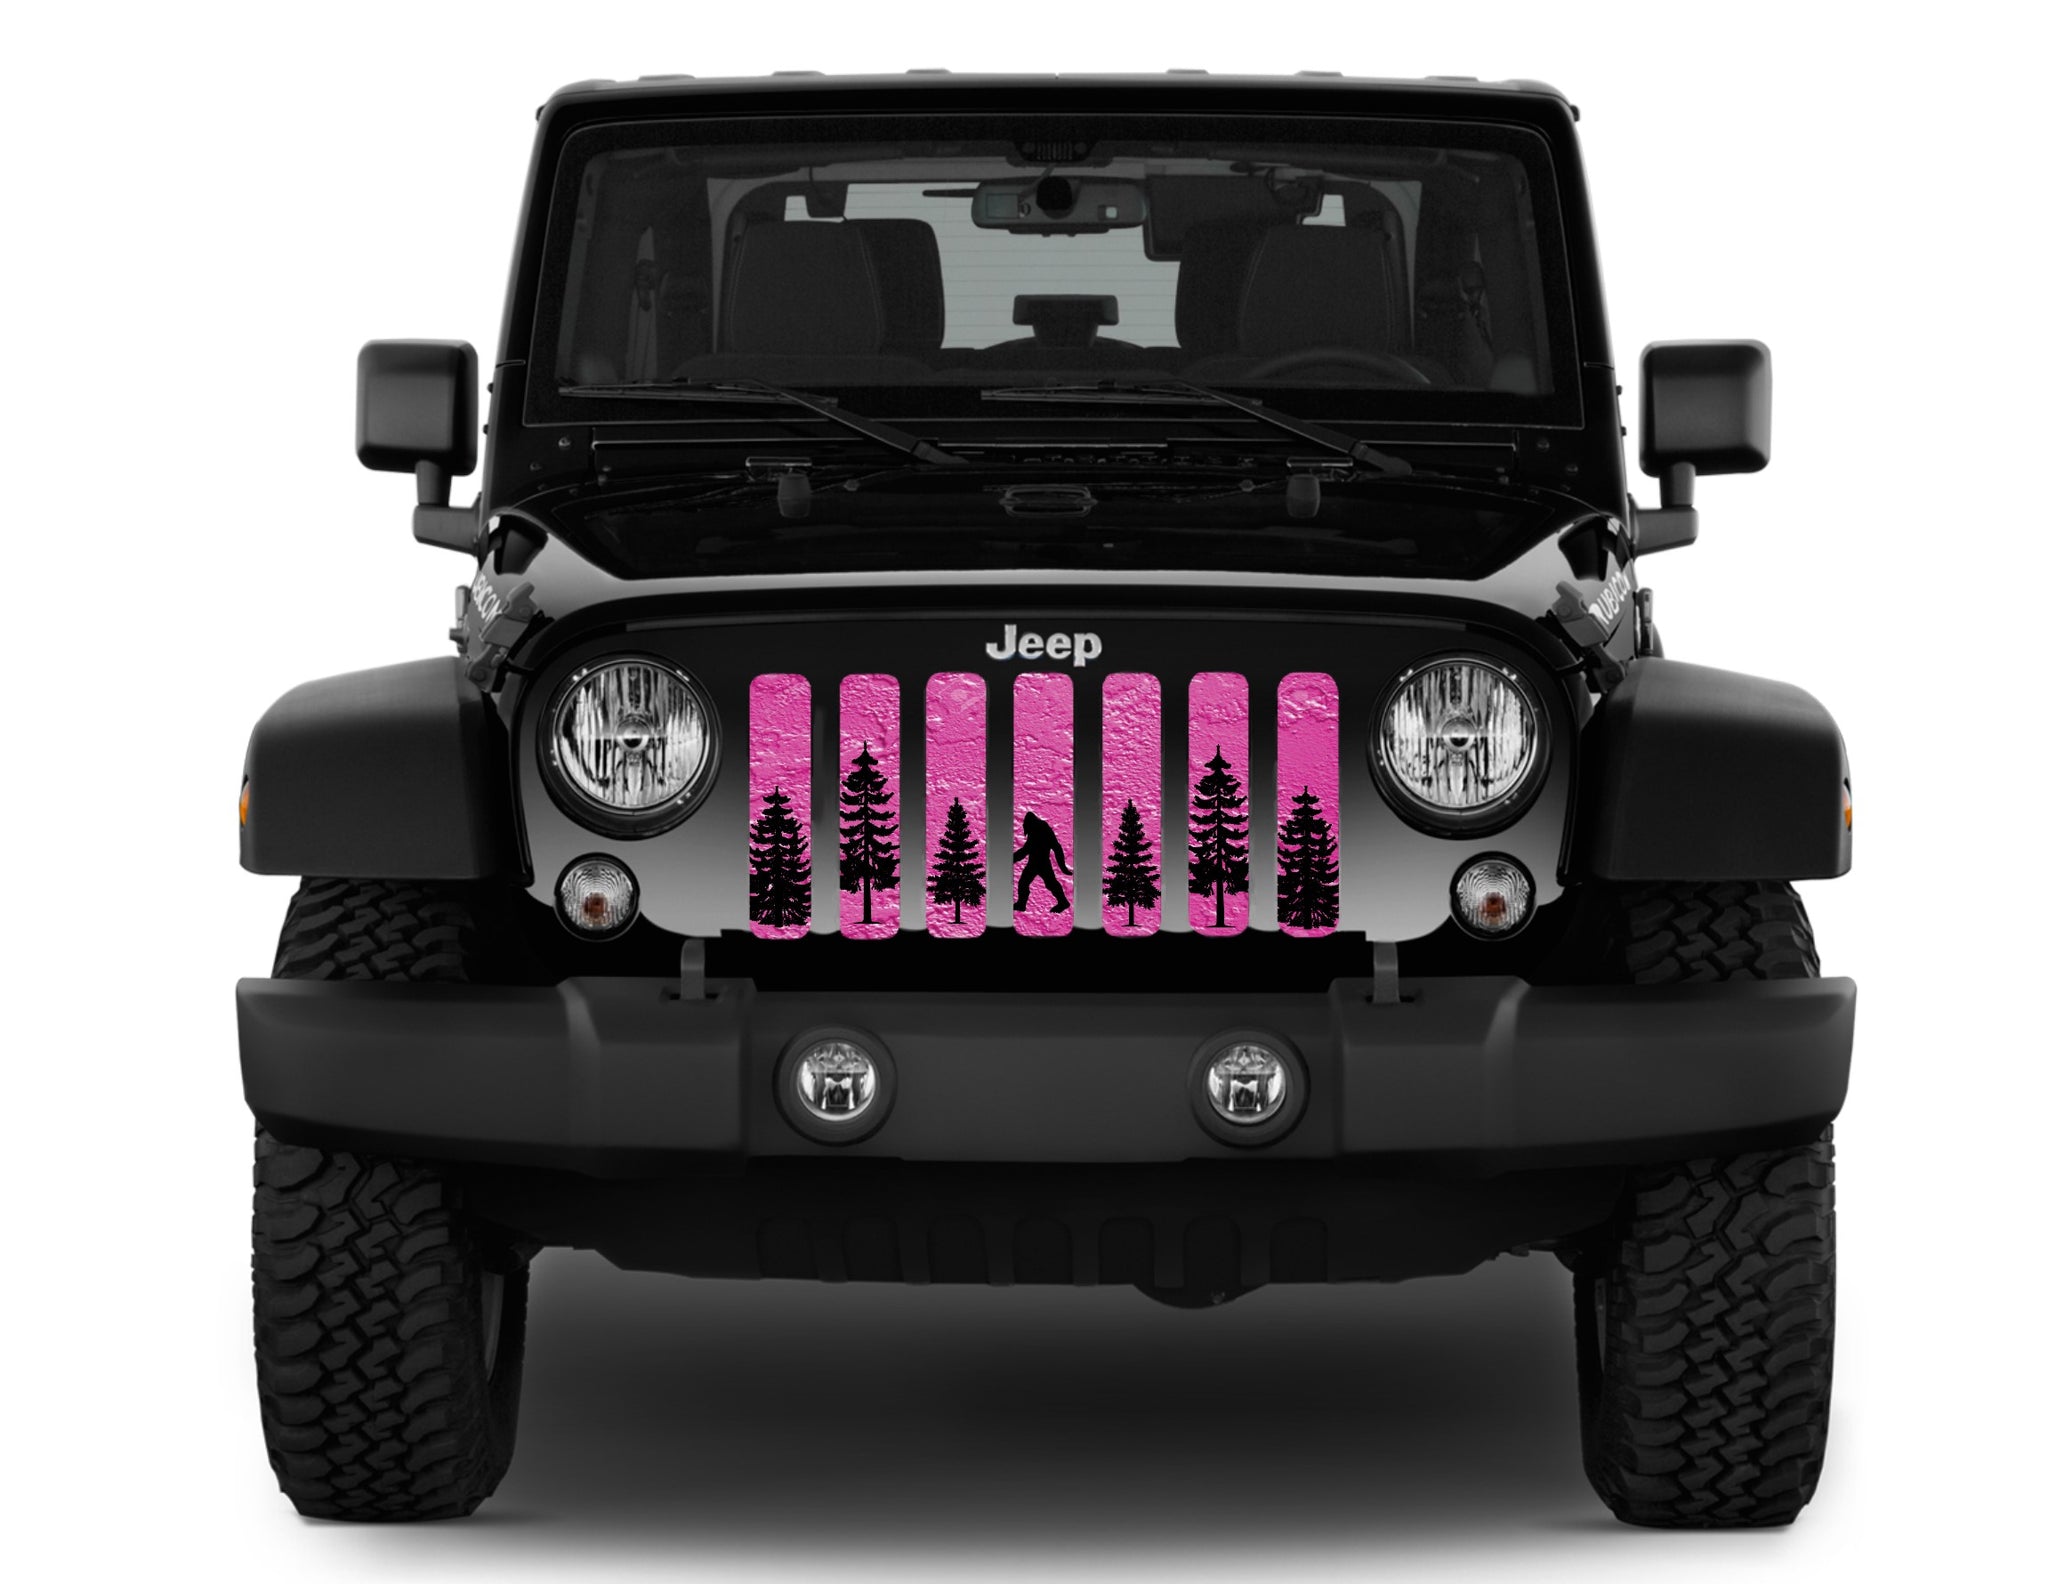 Jeep Wrangler Bigfoot Pink Background Grille Insert | Dirty Acres